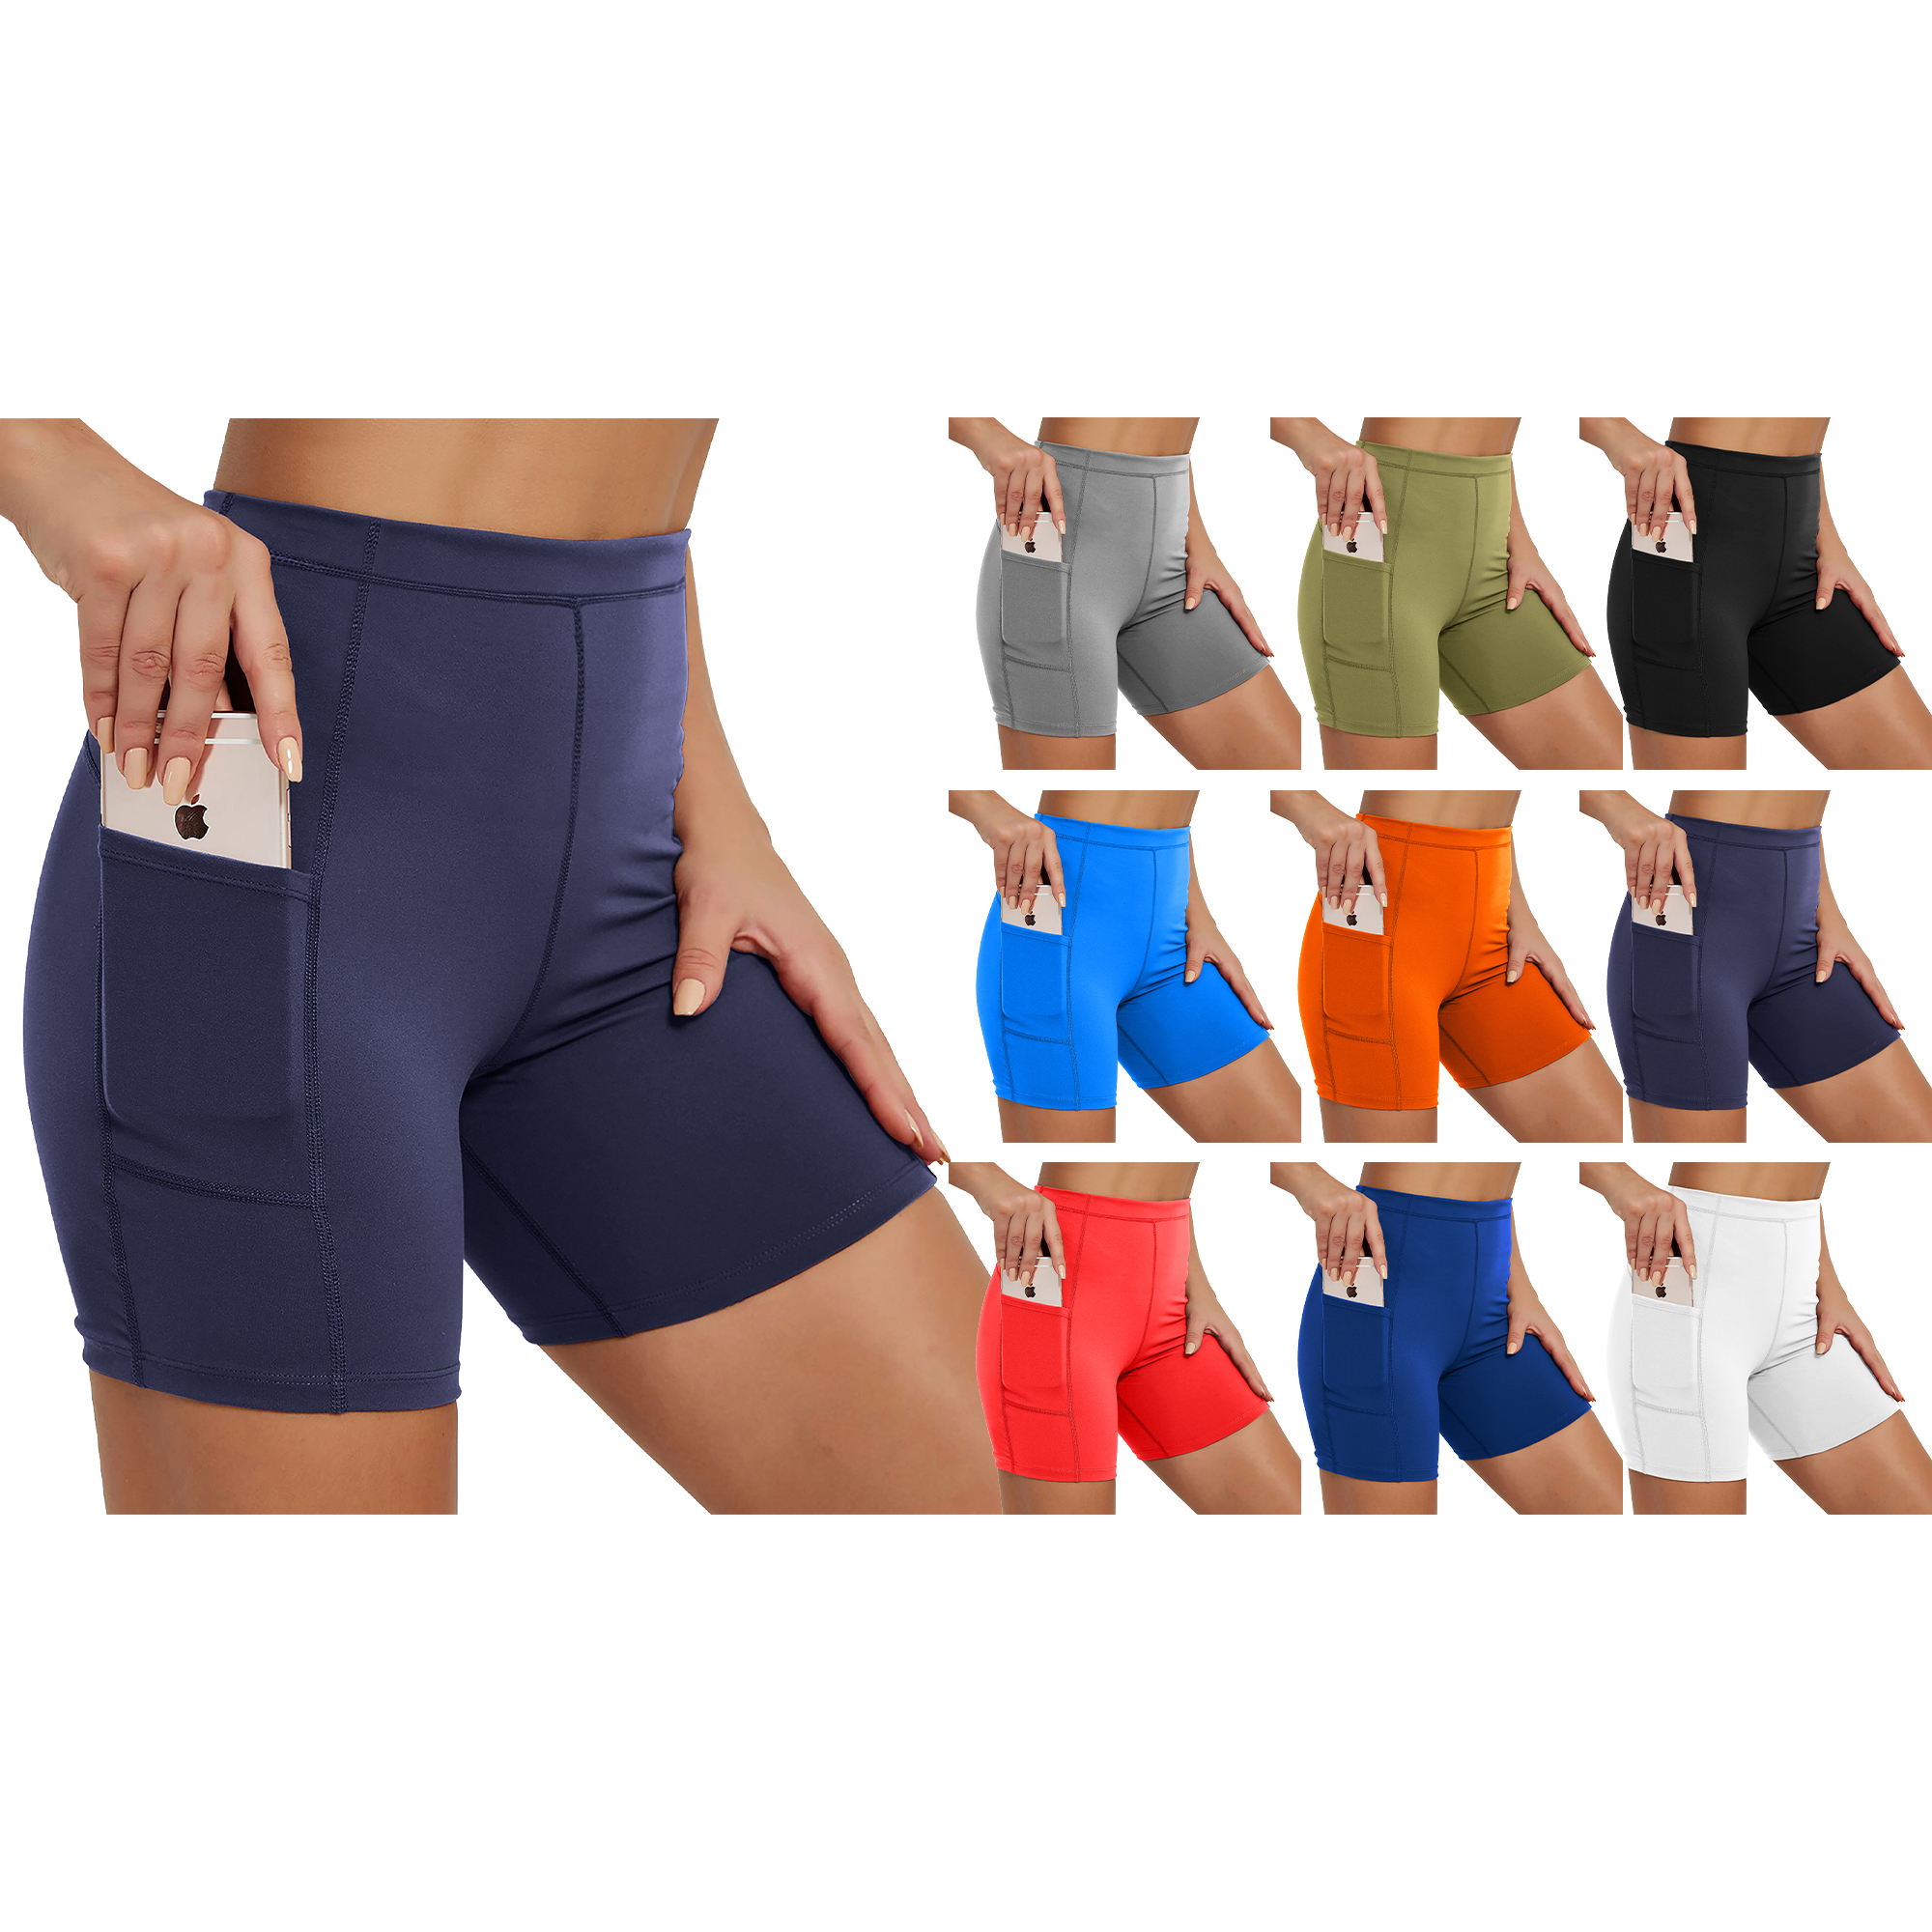 2-Pack Women's Workout Compression Training Shorts With Pocket Moisture Wicking Soft Solid Active Wear Bottoms For Fitness Gym Yoga Wear - M